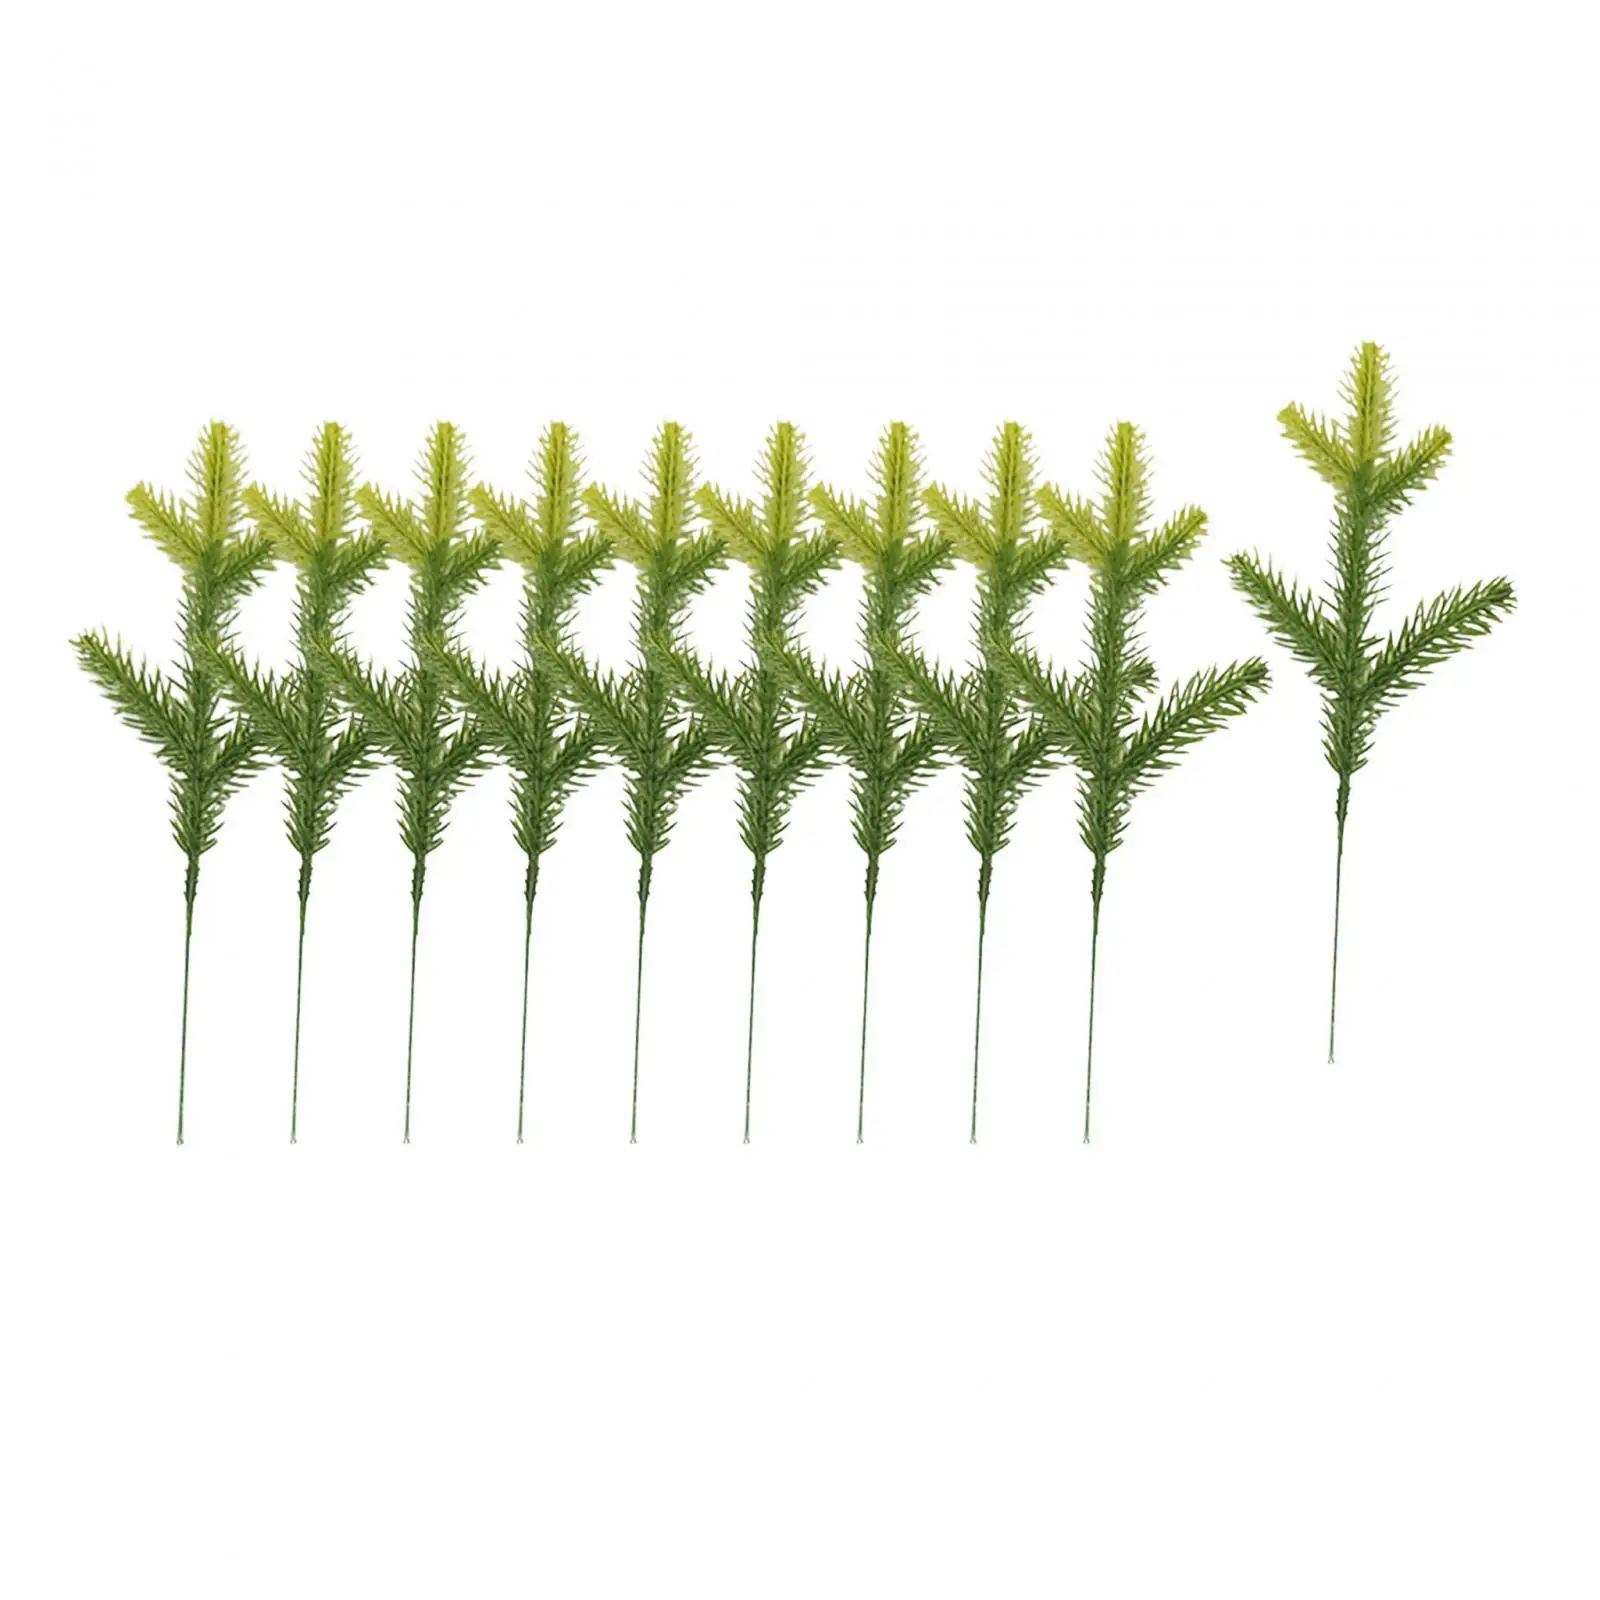 10Pcs Artificial Pine Branches Fake Plant DIY Wreath Accessories Garland Christmas Tree Ornament for Xmas Wedding Decorations